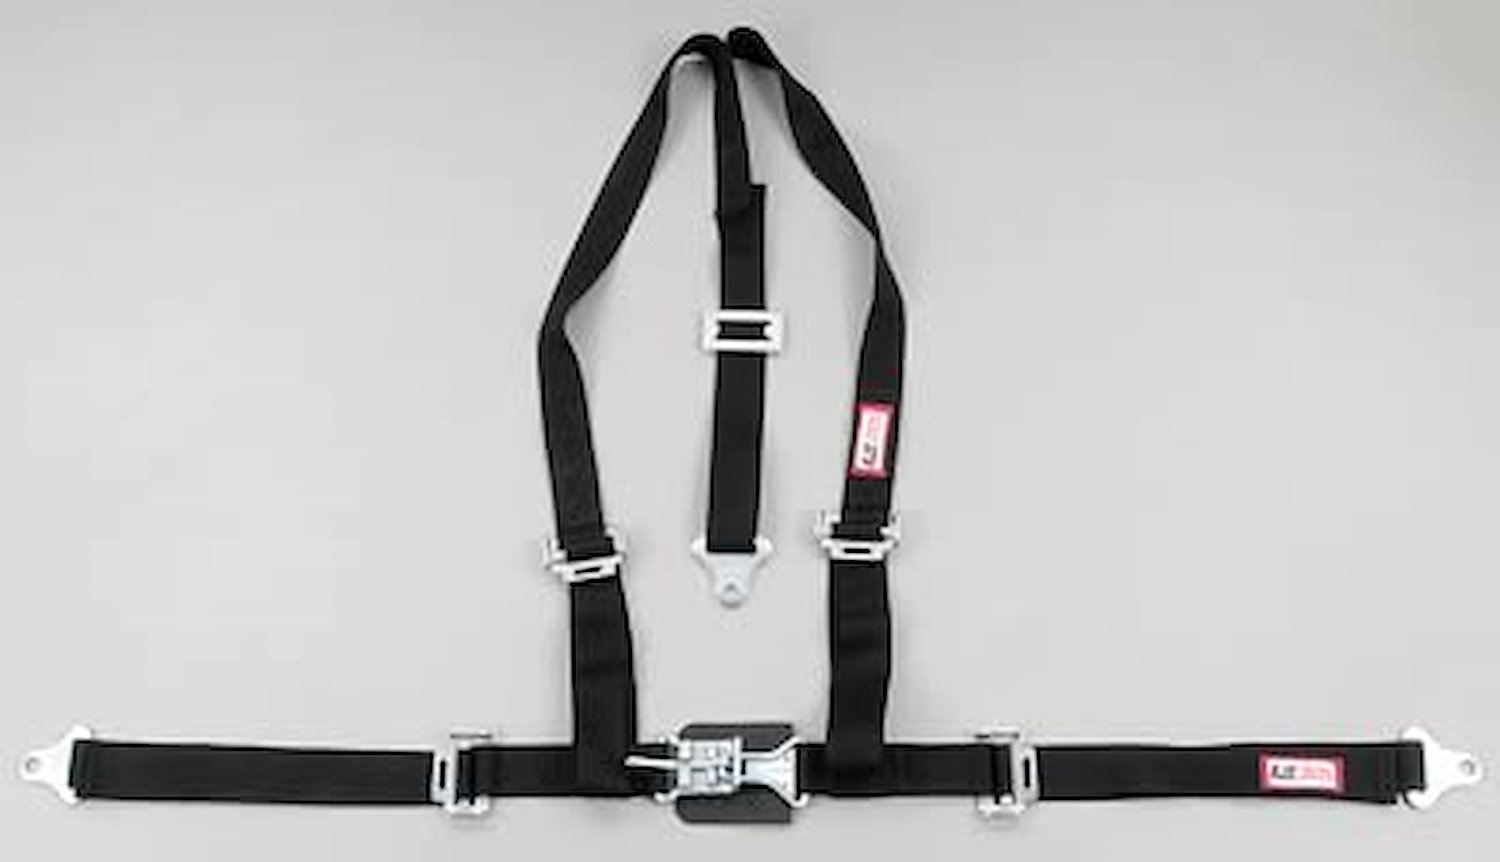 NON-SFI L&L HARNESS 2 PULL DOWN Lap Belt SEWN IN 2 S.H. V ROLL BAR Mount w/STERNUM STRAP ALL WRAP ENDS BLUE